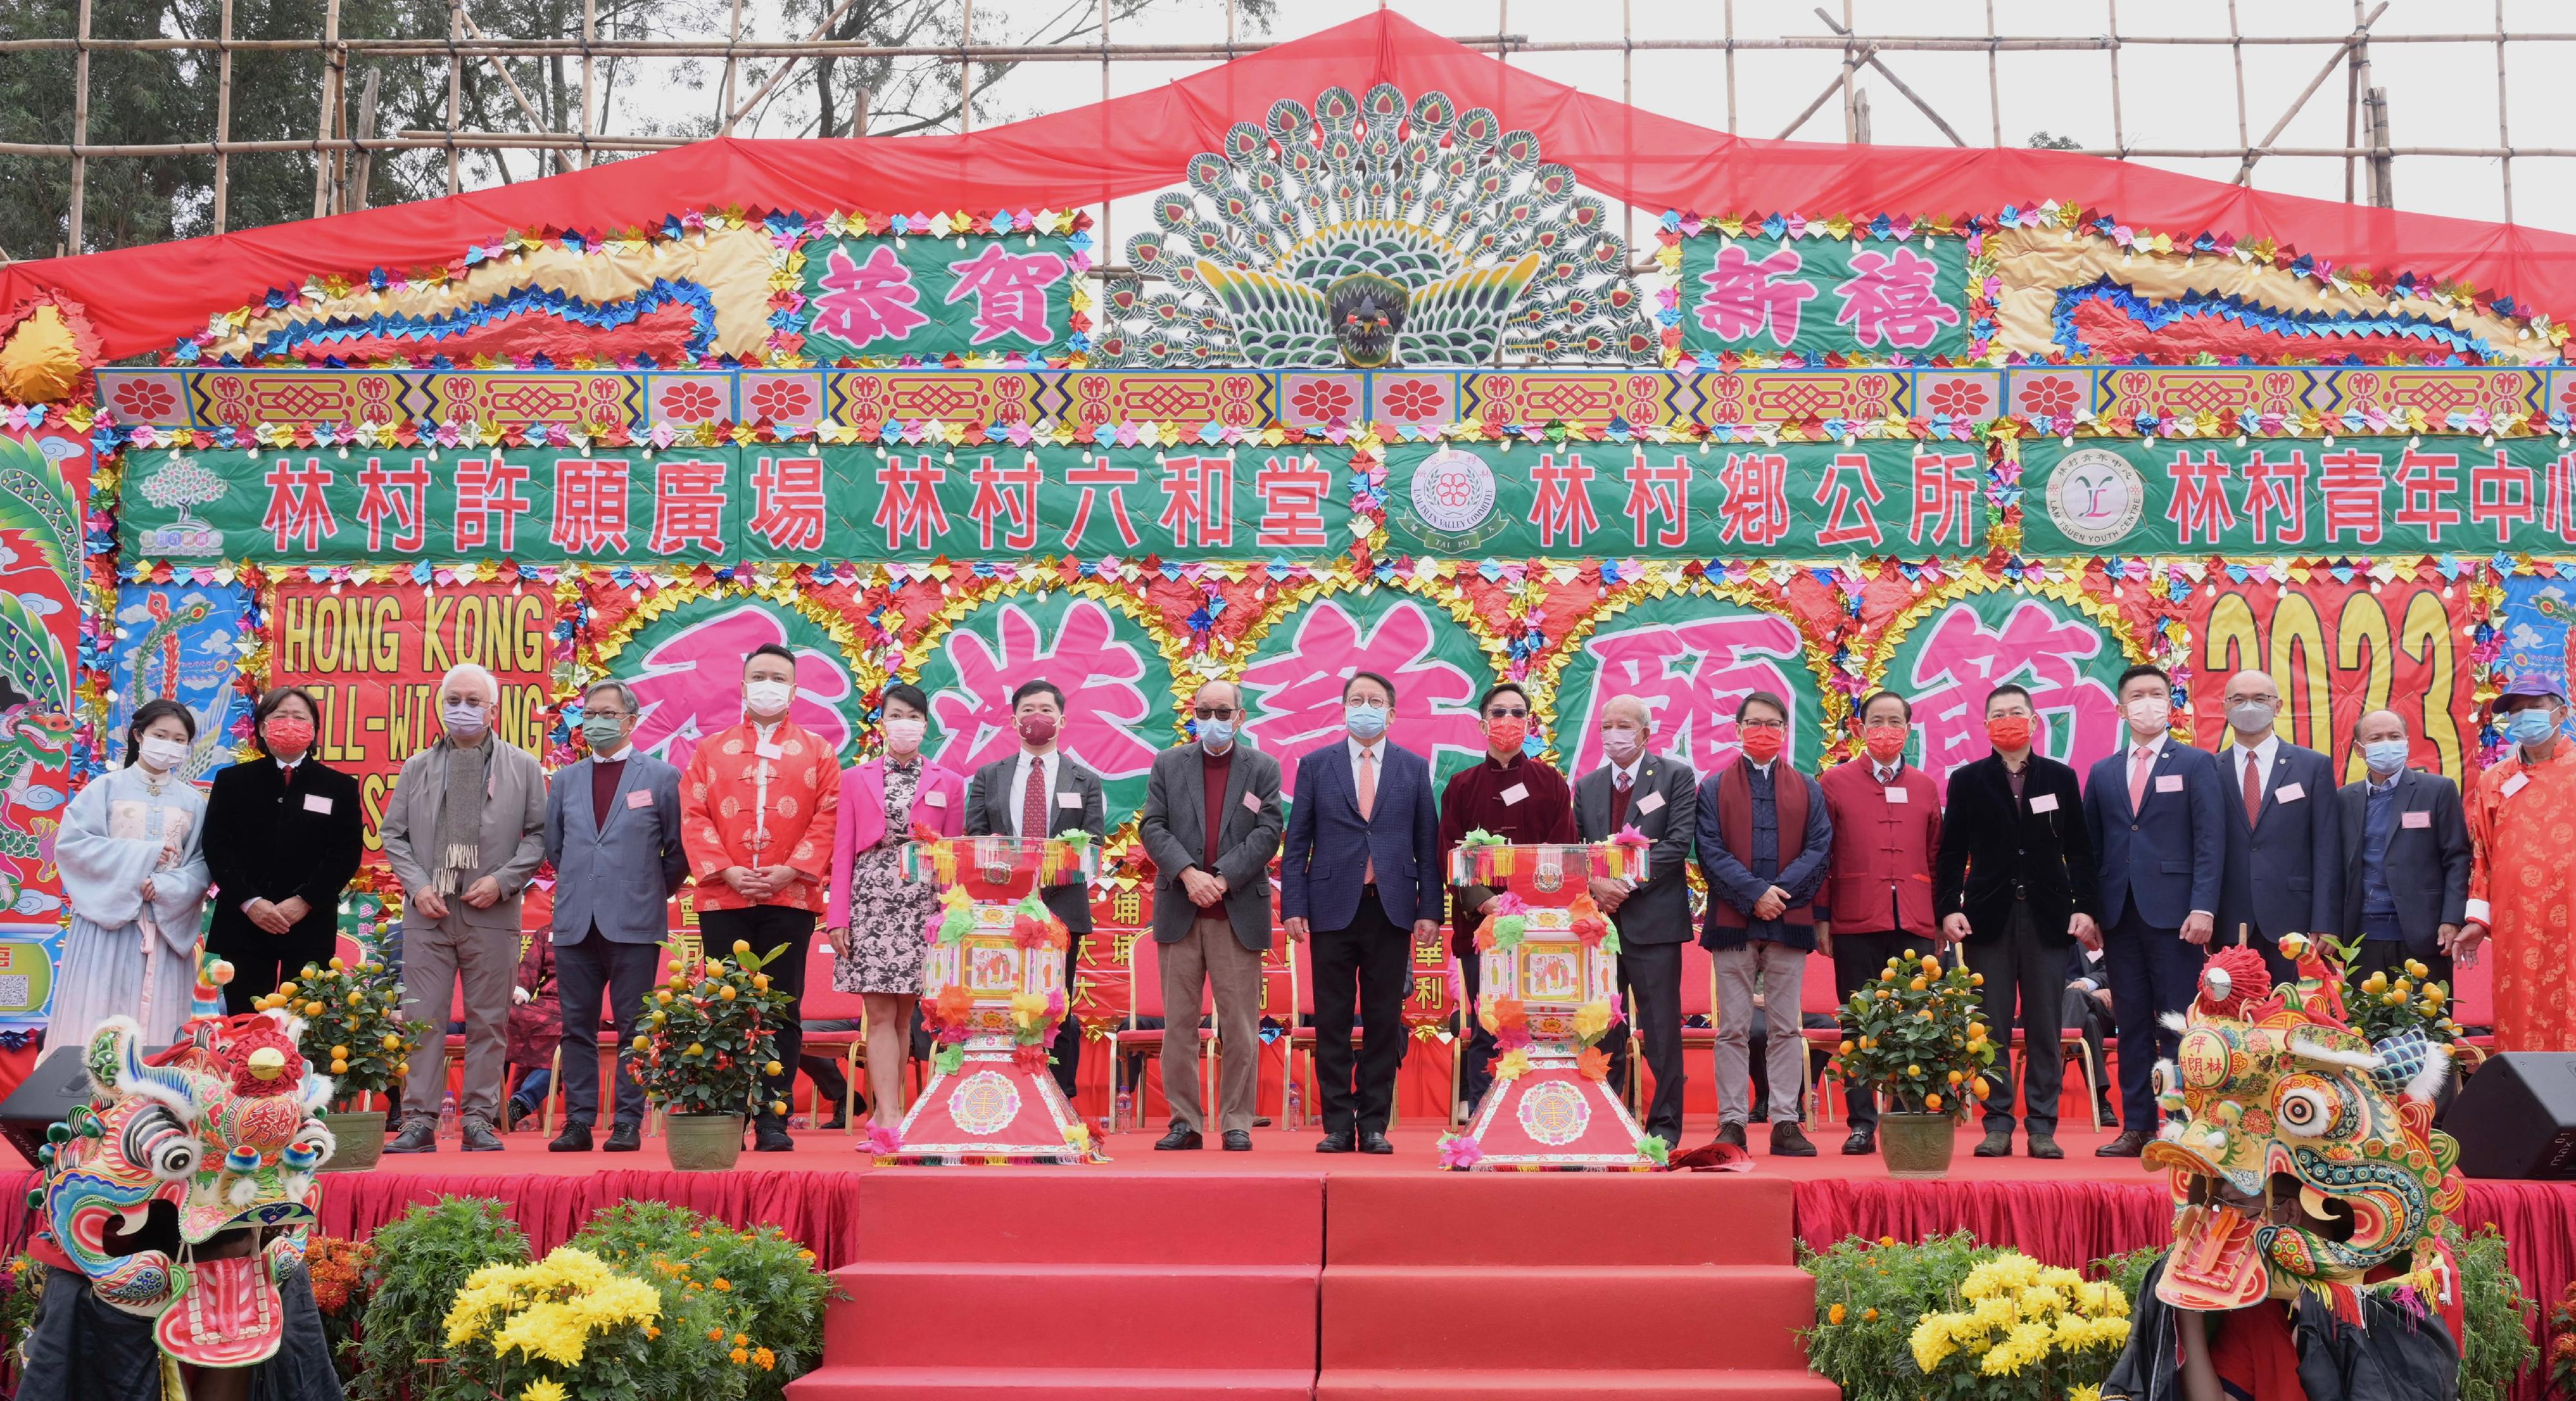 The Chief Secretary for Administration, Mr Chan Kwok-ki, attended the Hong Kong Well-wishing Festival 2023 at Lam Tsuen, Tai Po, today (January 22). Photo shows Mr Chan (ninth left); the initiator of the Hong Kong Well-wishing Festival, Mr Cheung Hok-ming (eighth left); the Chairman of the Heung Yee Kuk, Mr Kenneth Lau (ninth right); and other guests, officiating at the lighting ceremony.